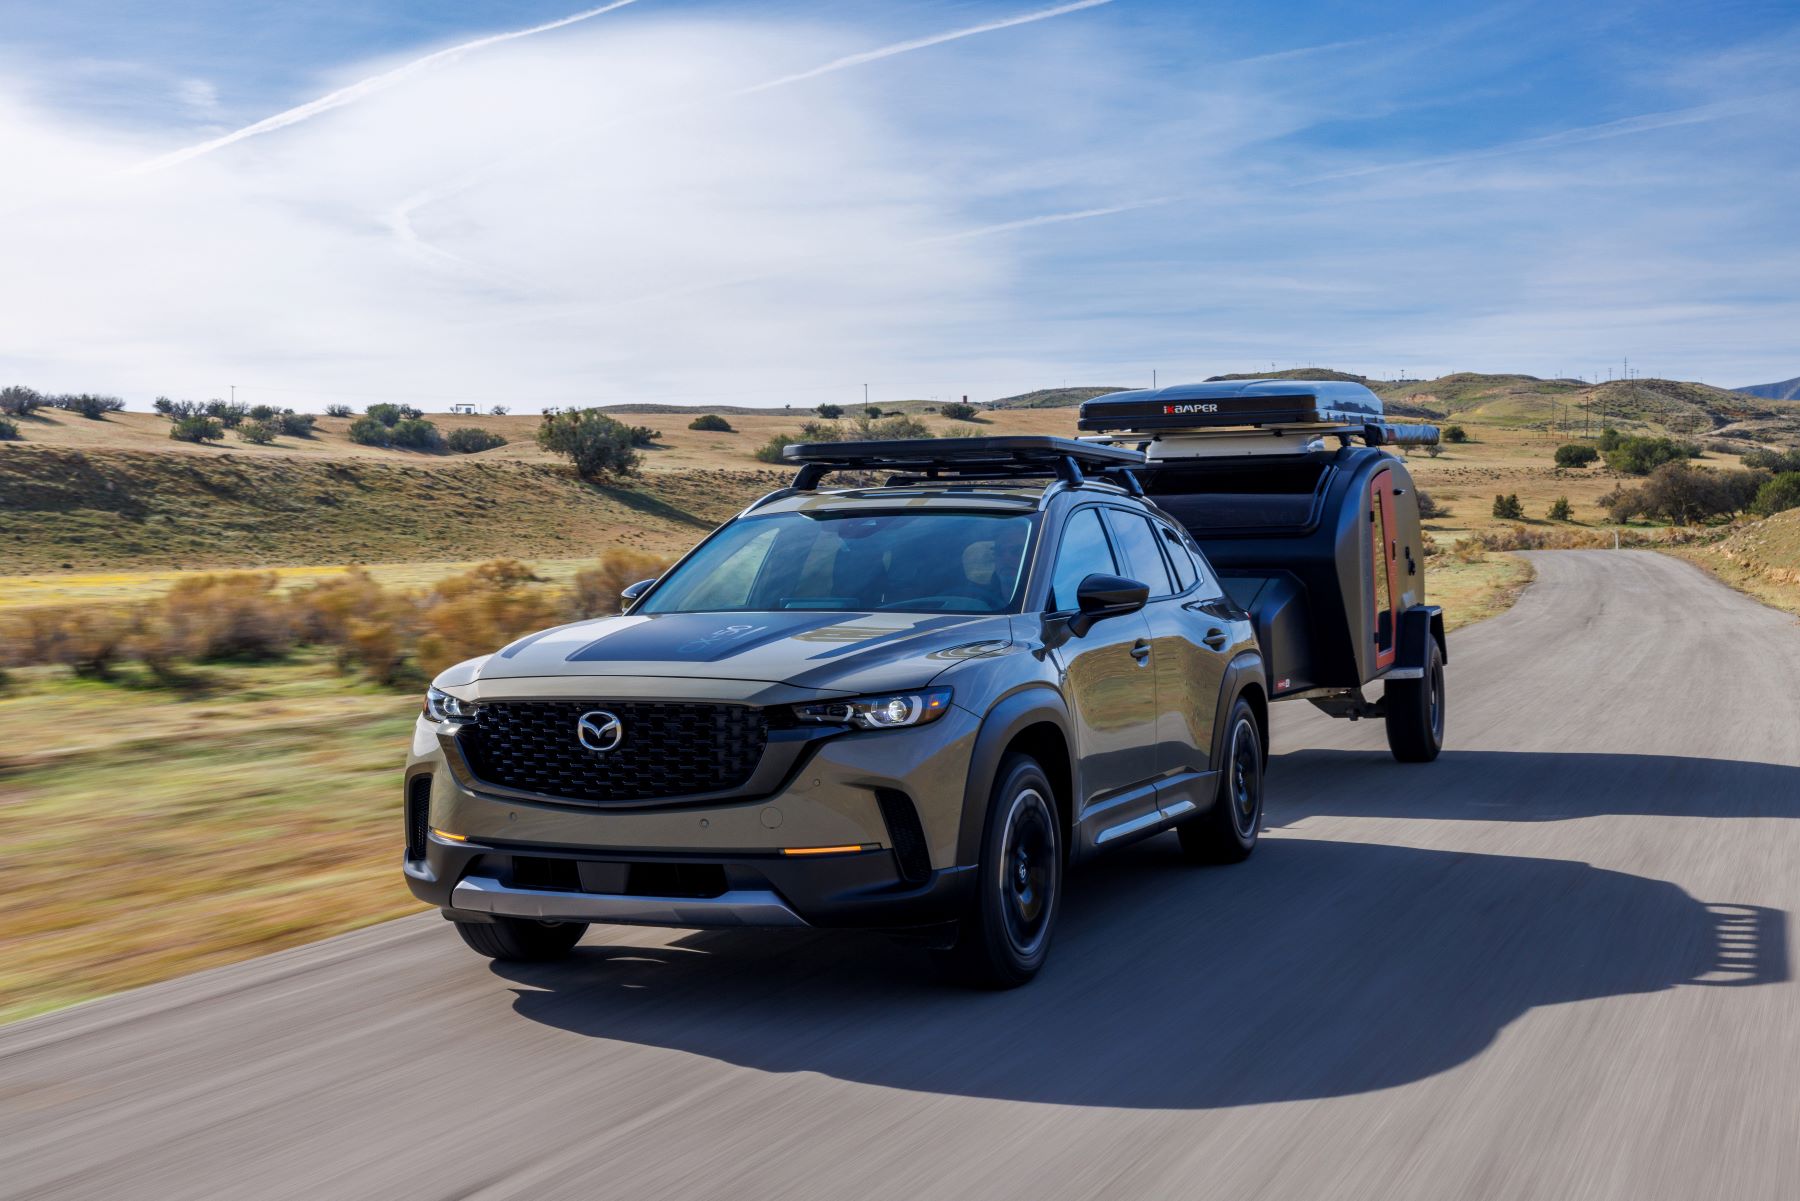 A 2023 Mazda CX-50 compact crossover SUV towing a travel trailer on a country highway